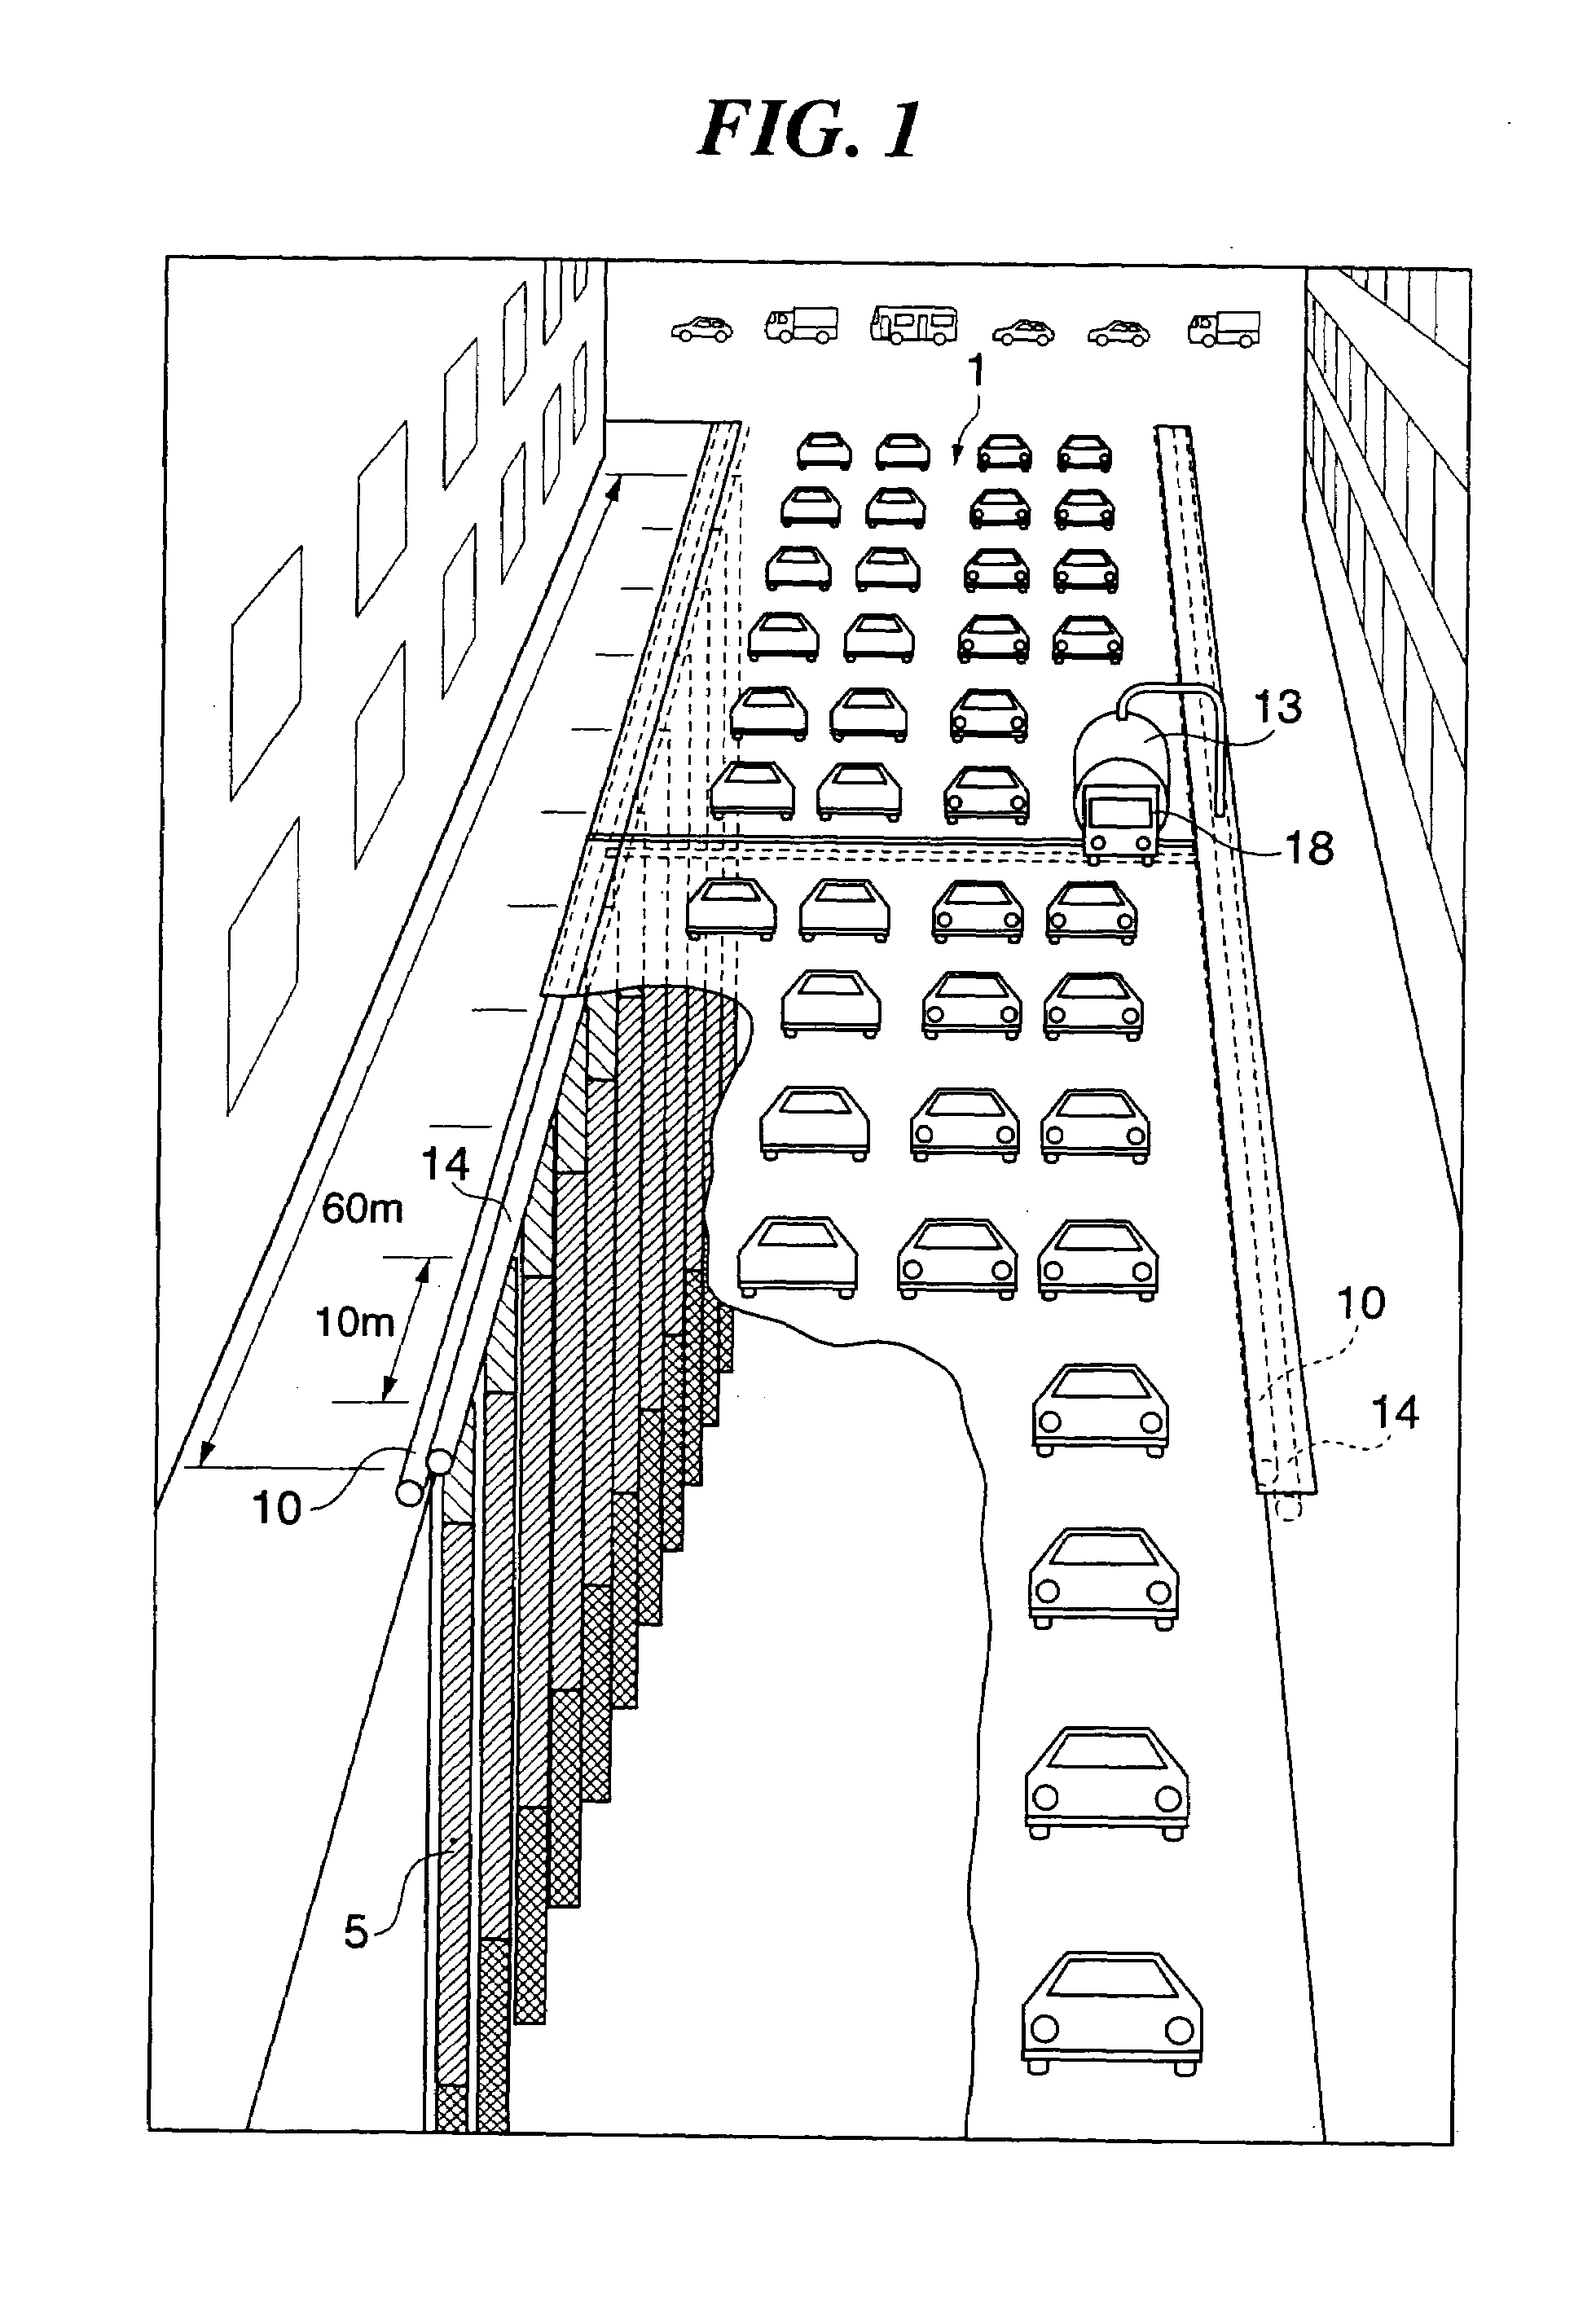 Method for preventing seismic liquefaction of ground in urbanized area and facilities used in this method